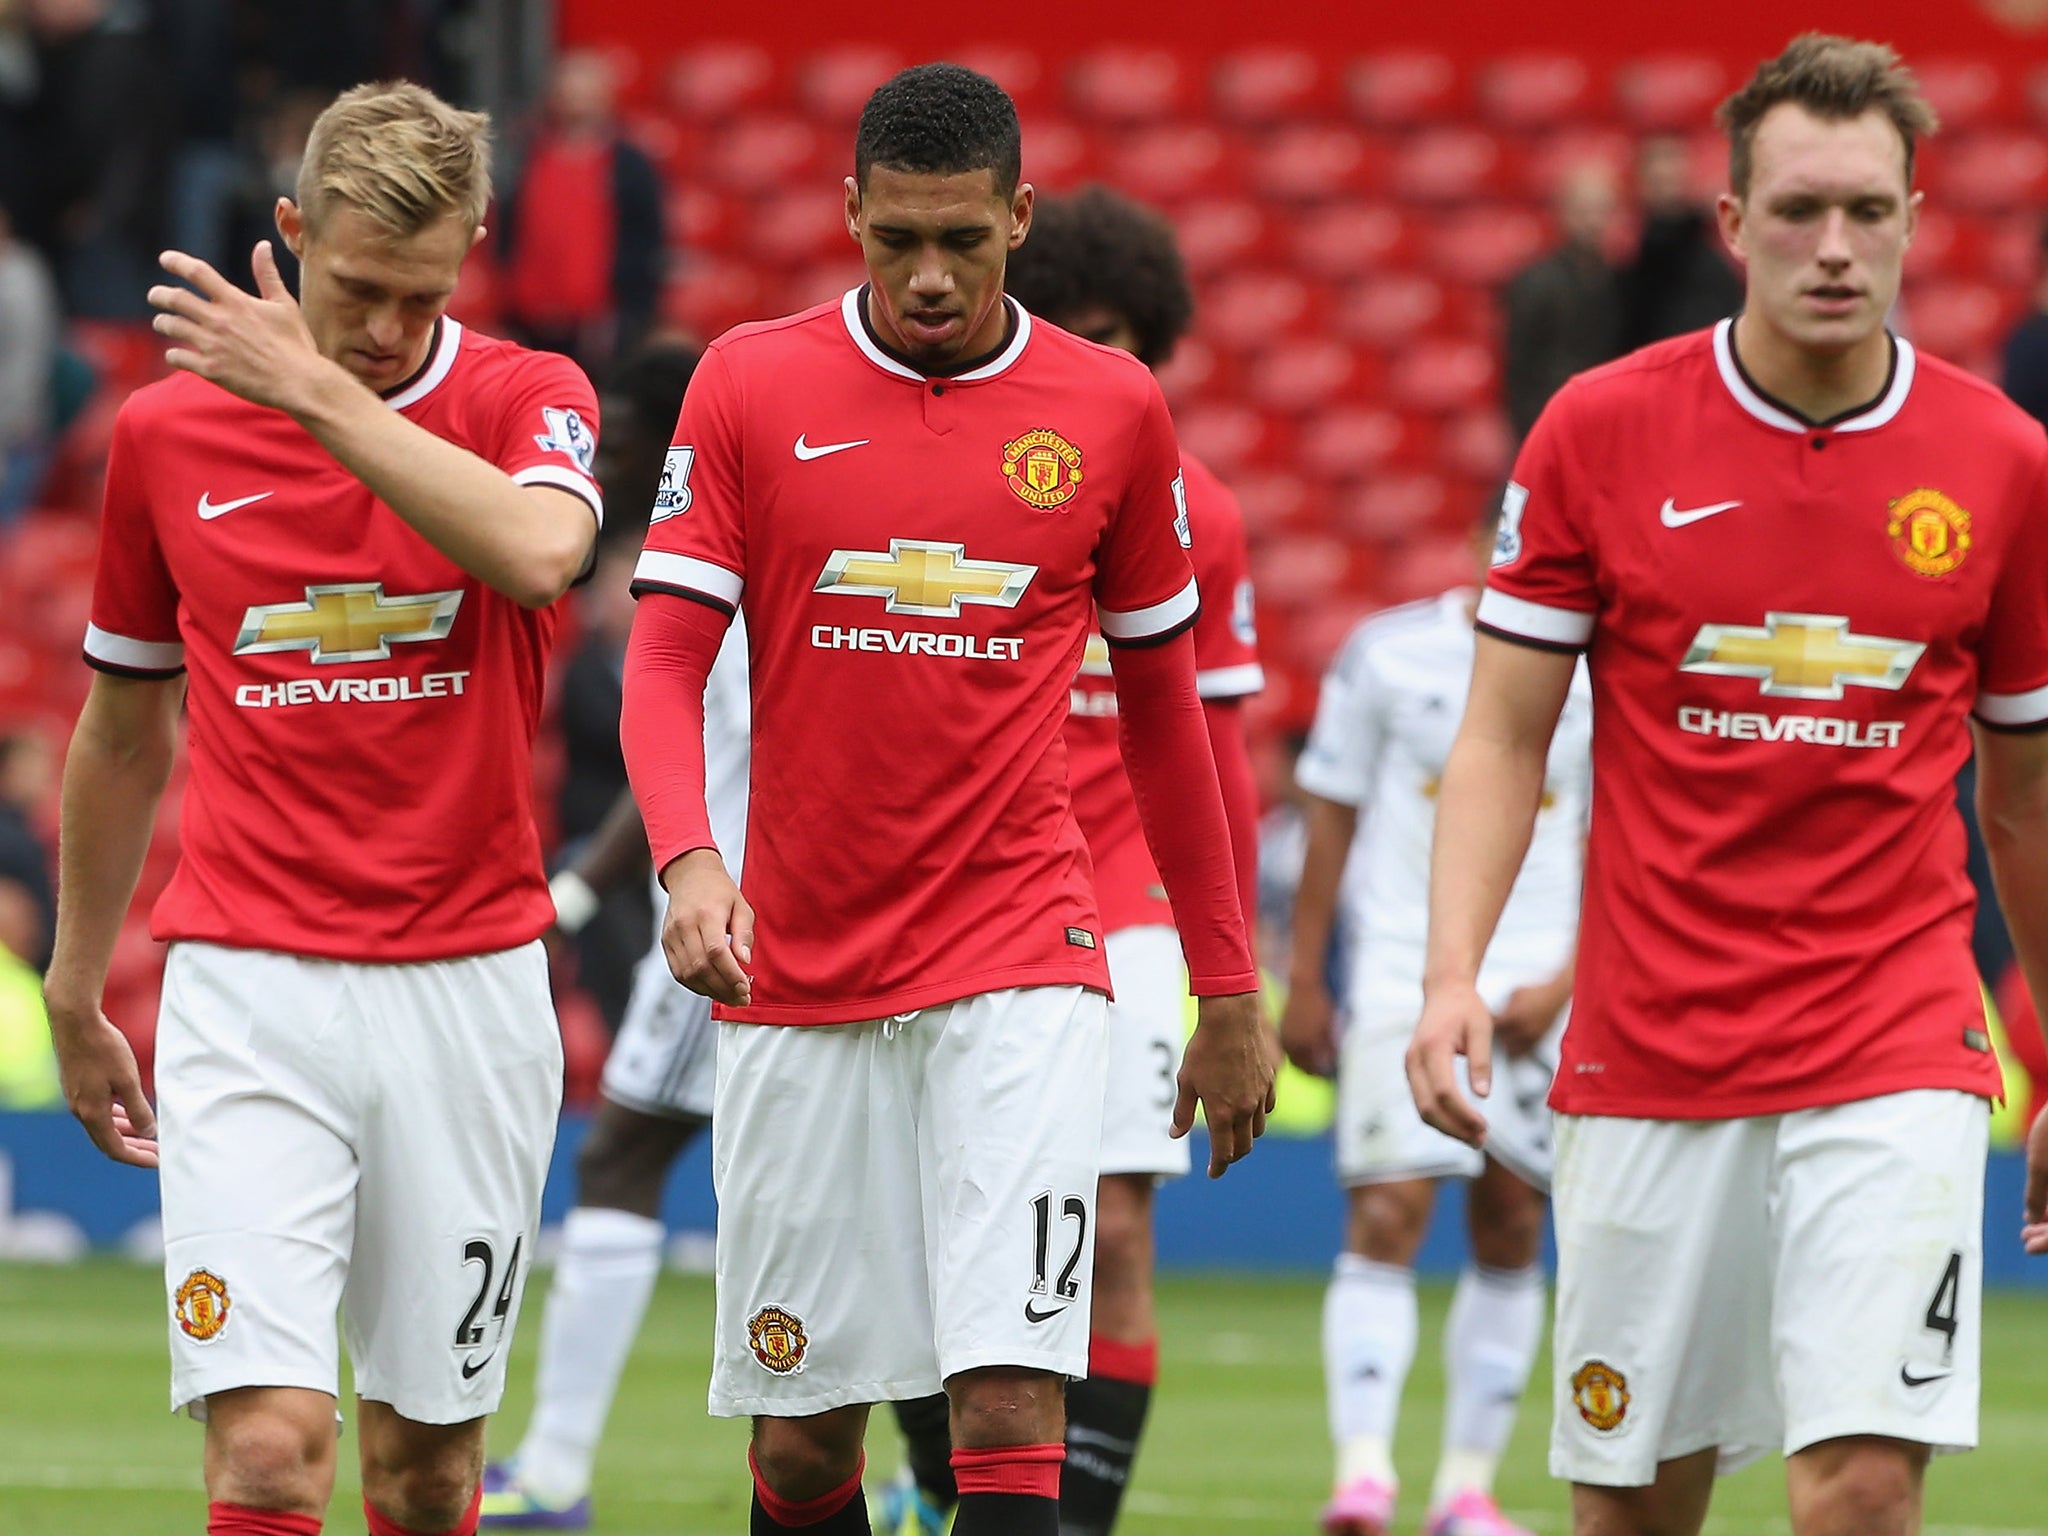 Darren Fletcher, Chris Smalling and Phil Jones leave the pitch after defeat to Swansea